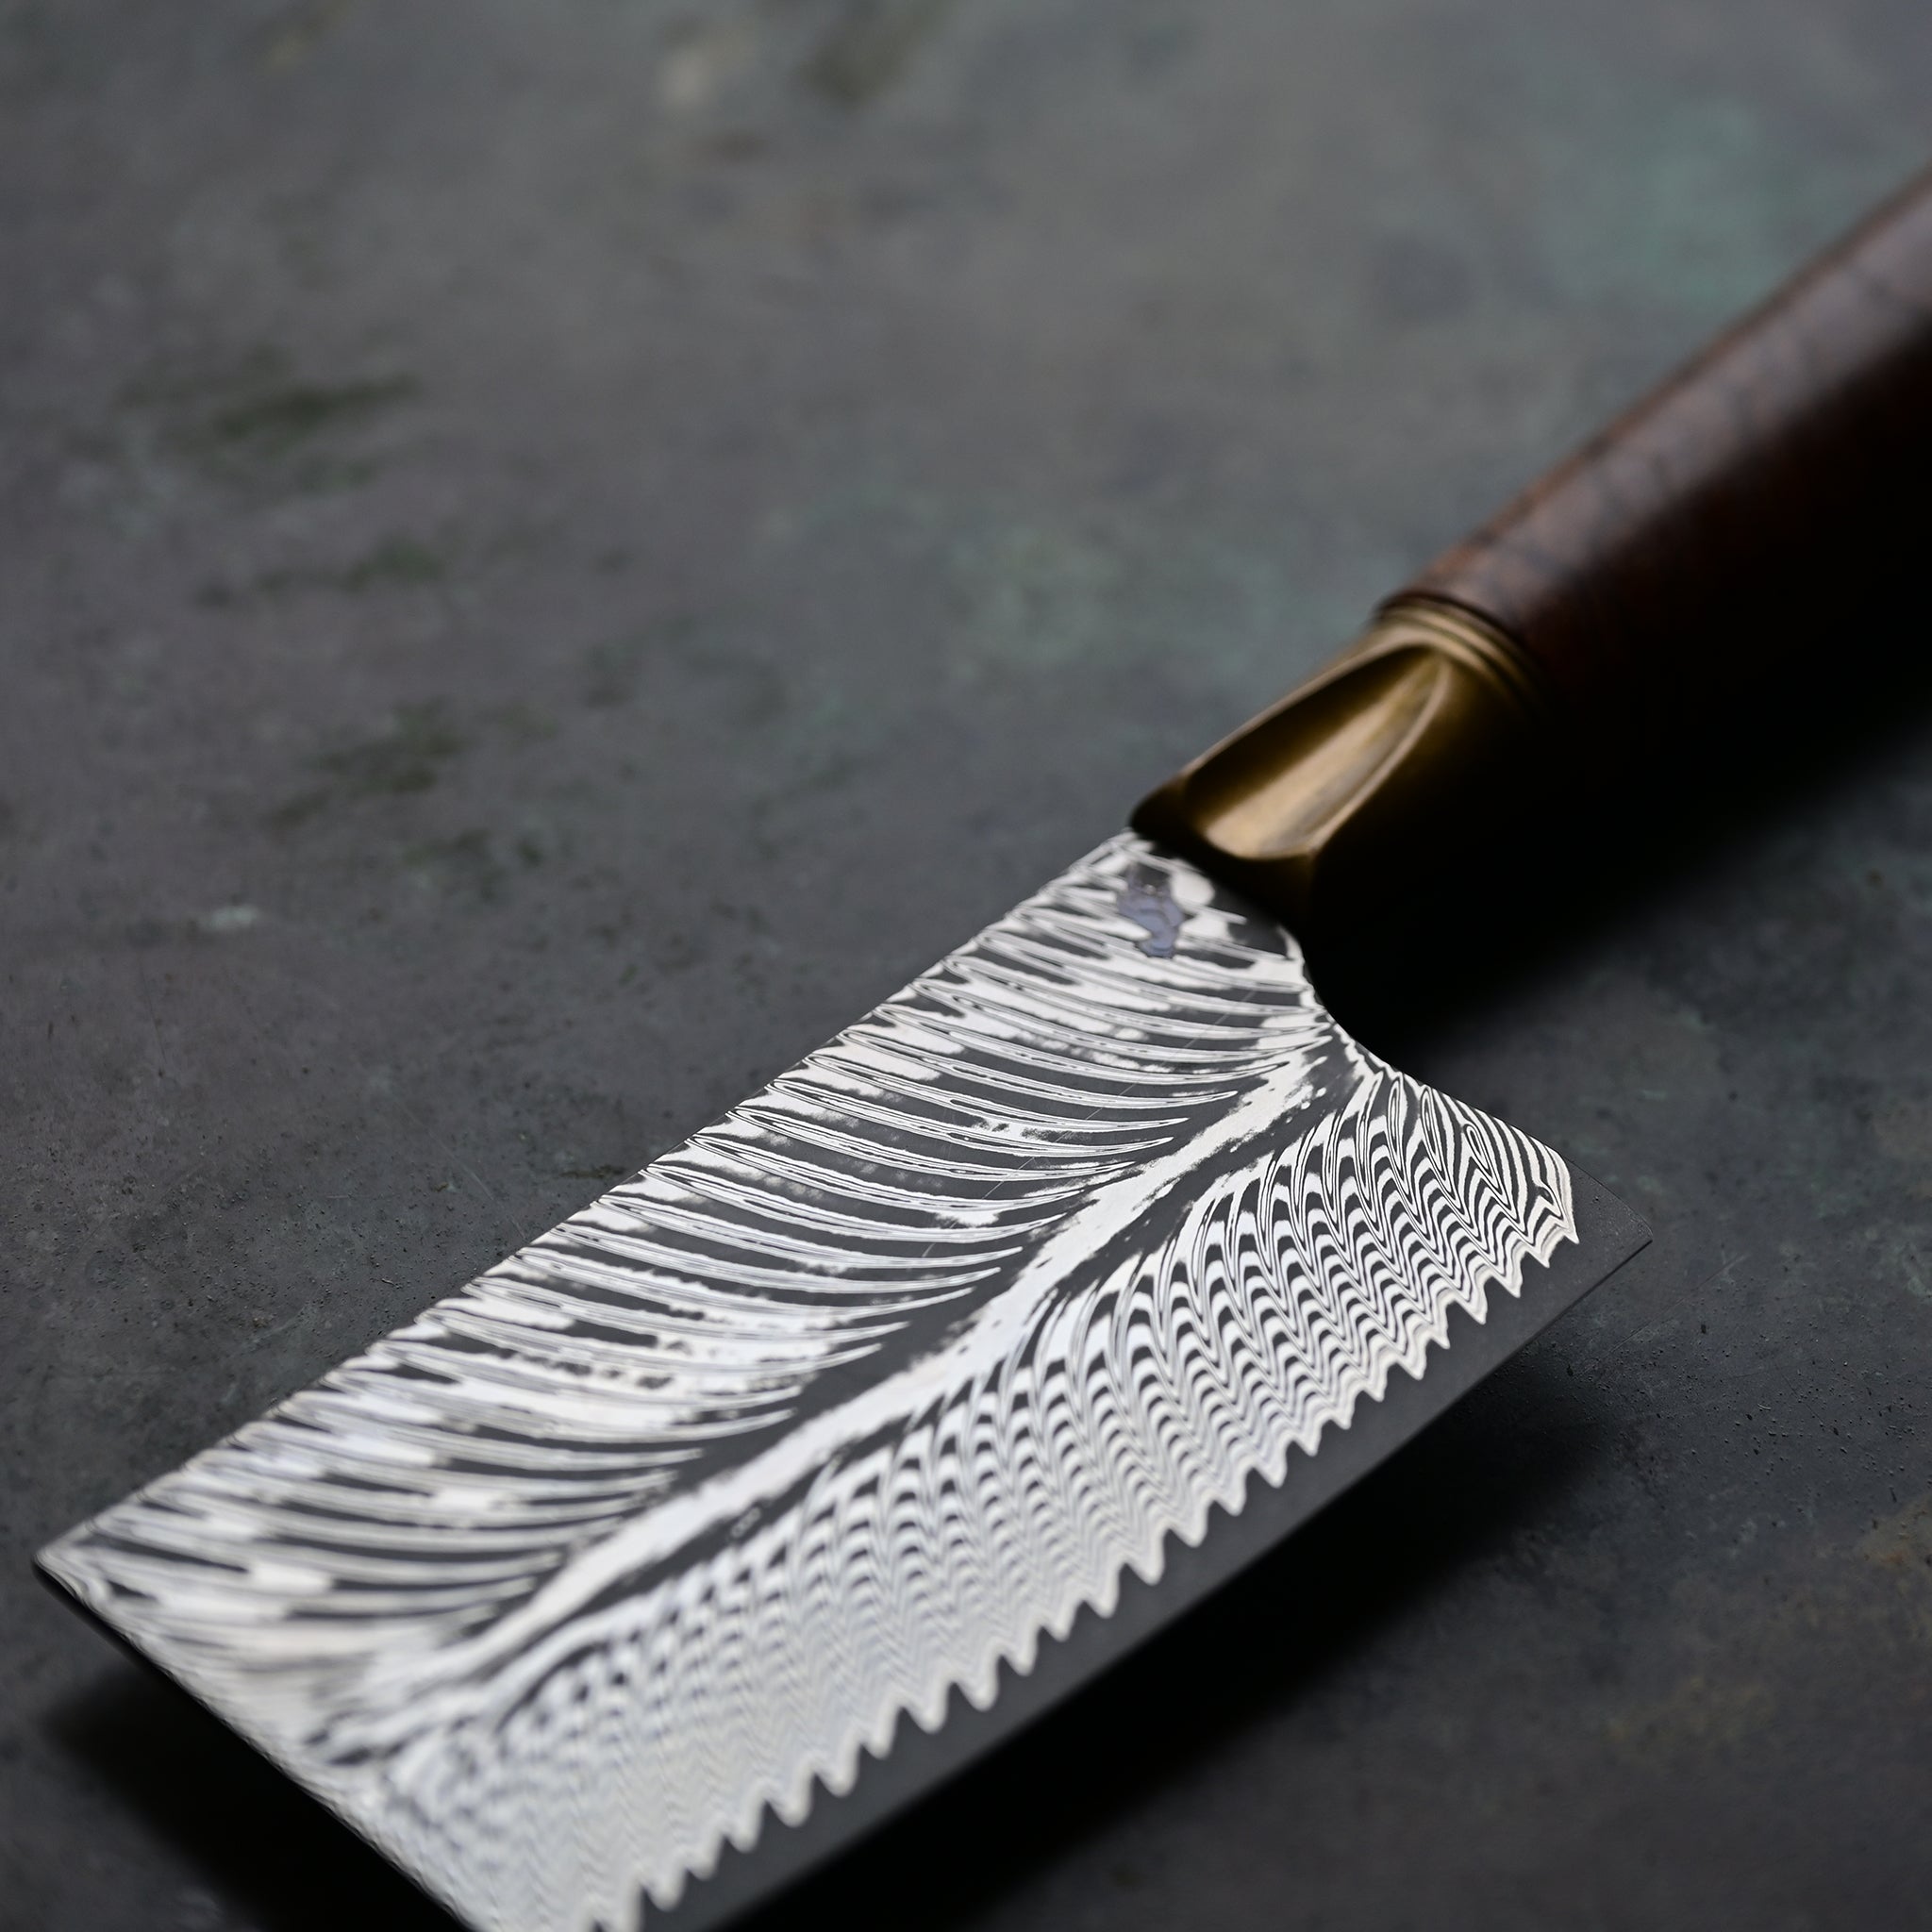 A mini cleaver with a bronze bolster, feather Damascus VG10 blade, and a Bocote wood handle, showcased on a concrete background